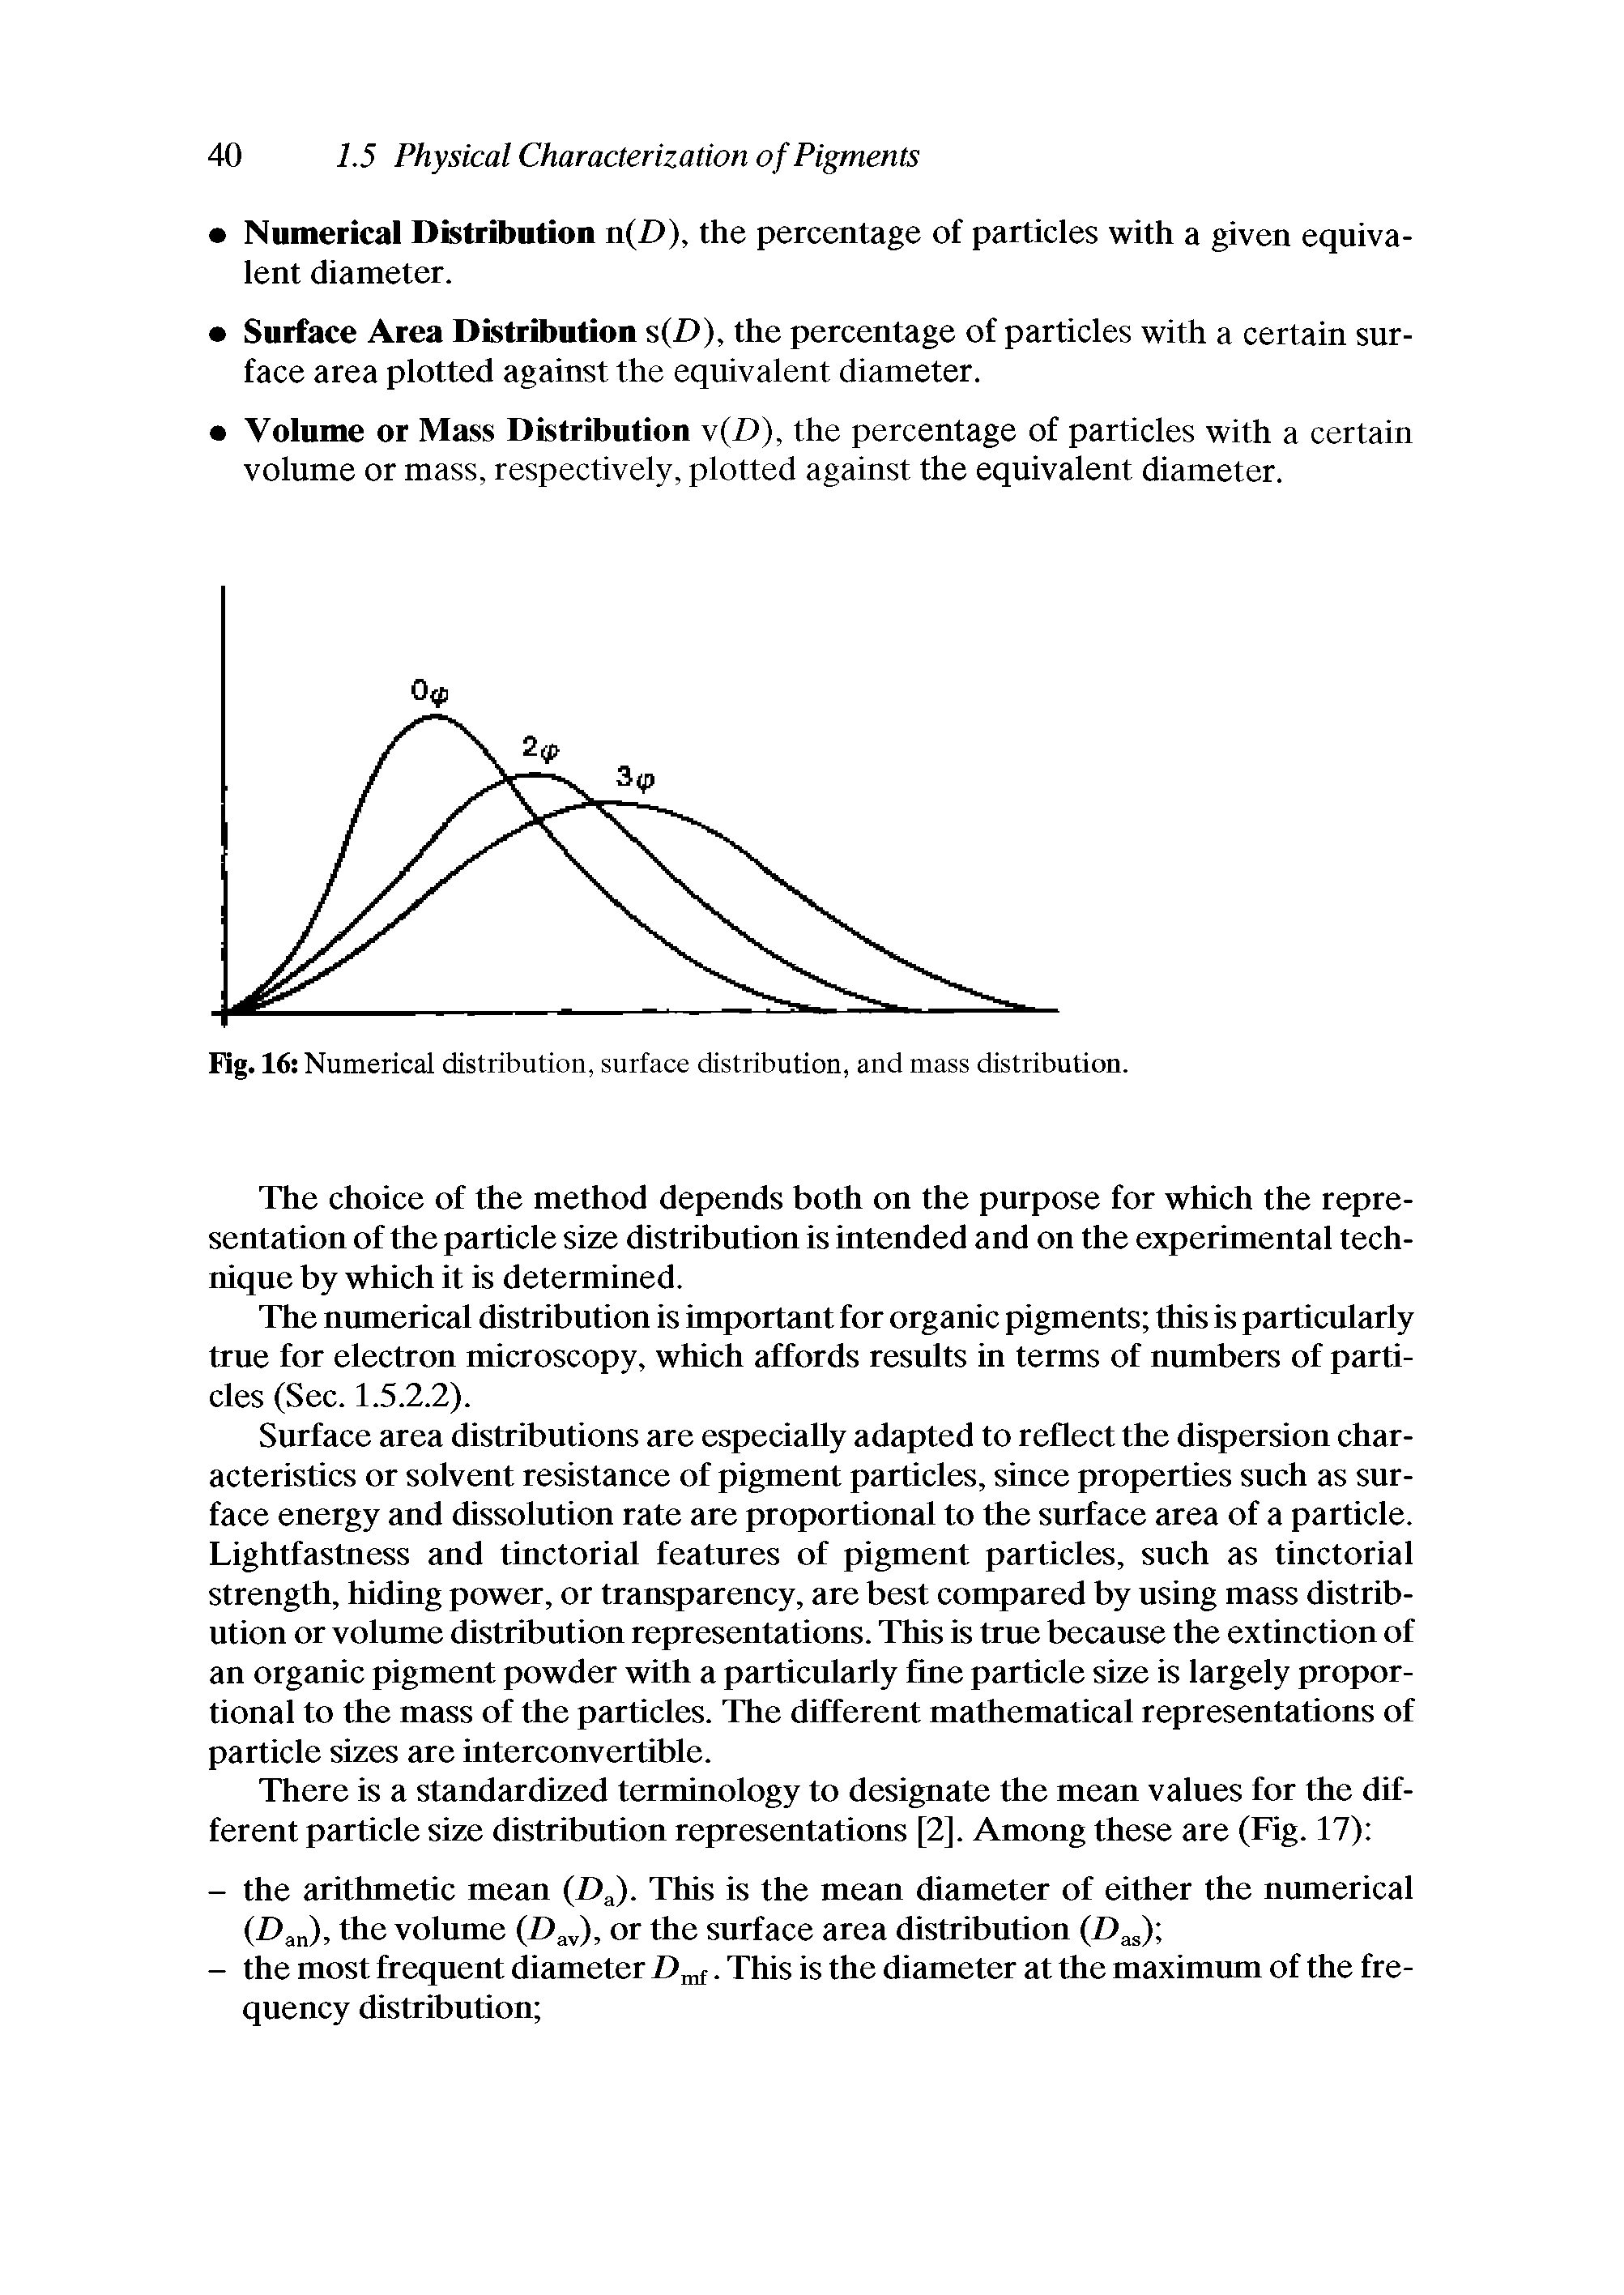 Fig. 16 Numerical distribution, surface distribution, and mass distribution.